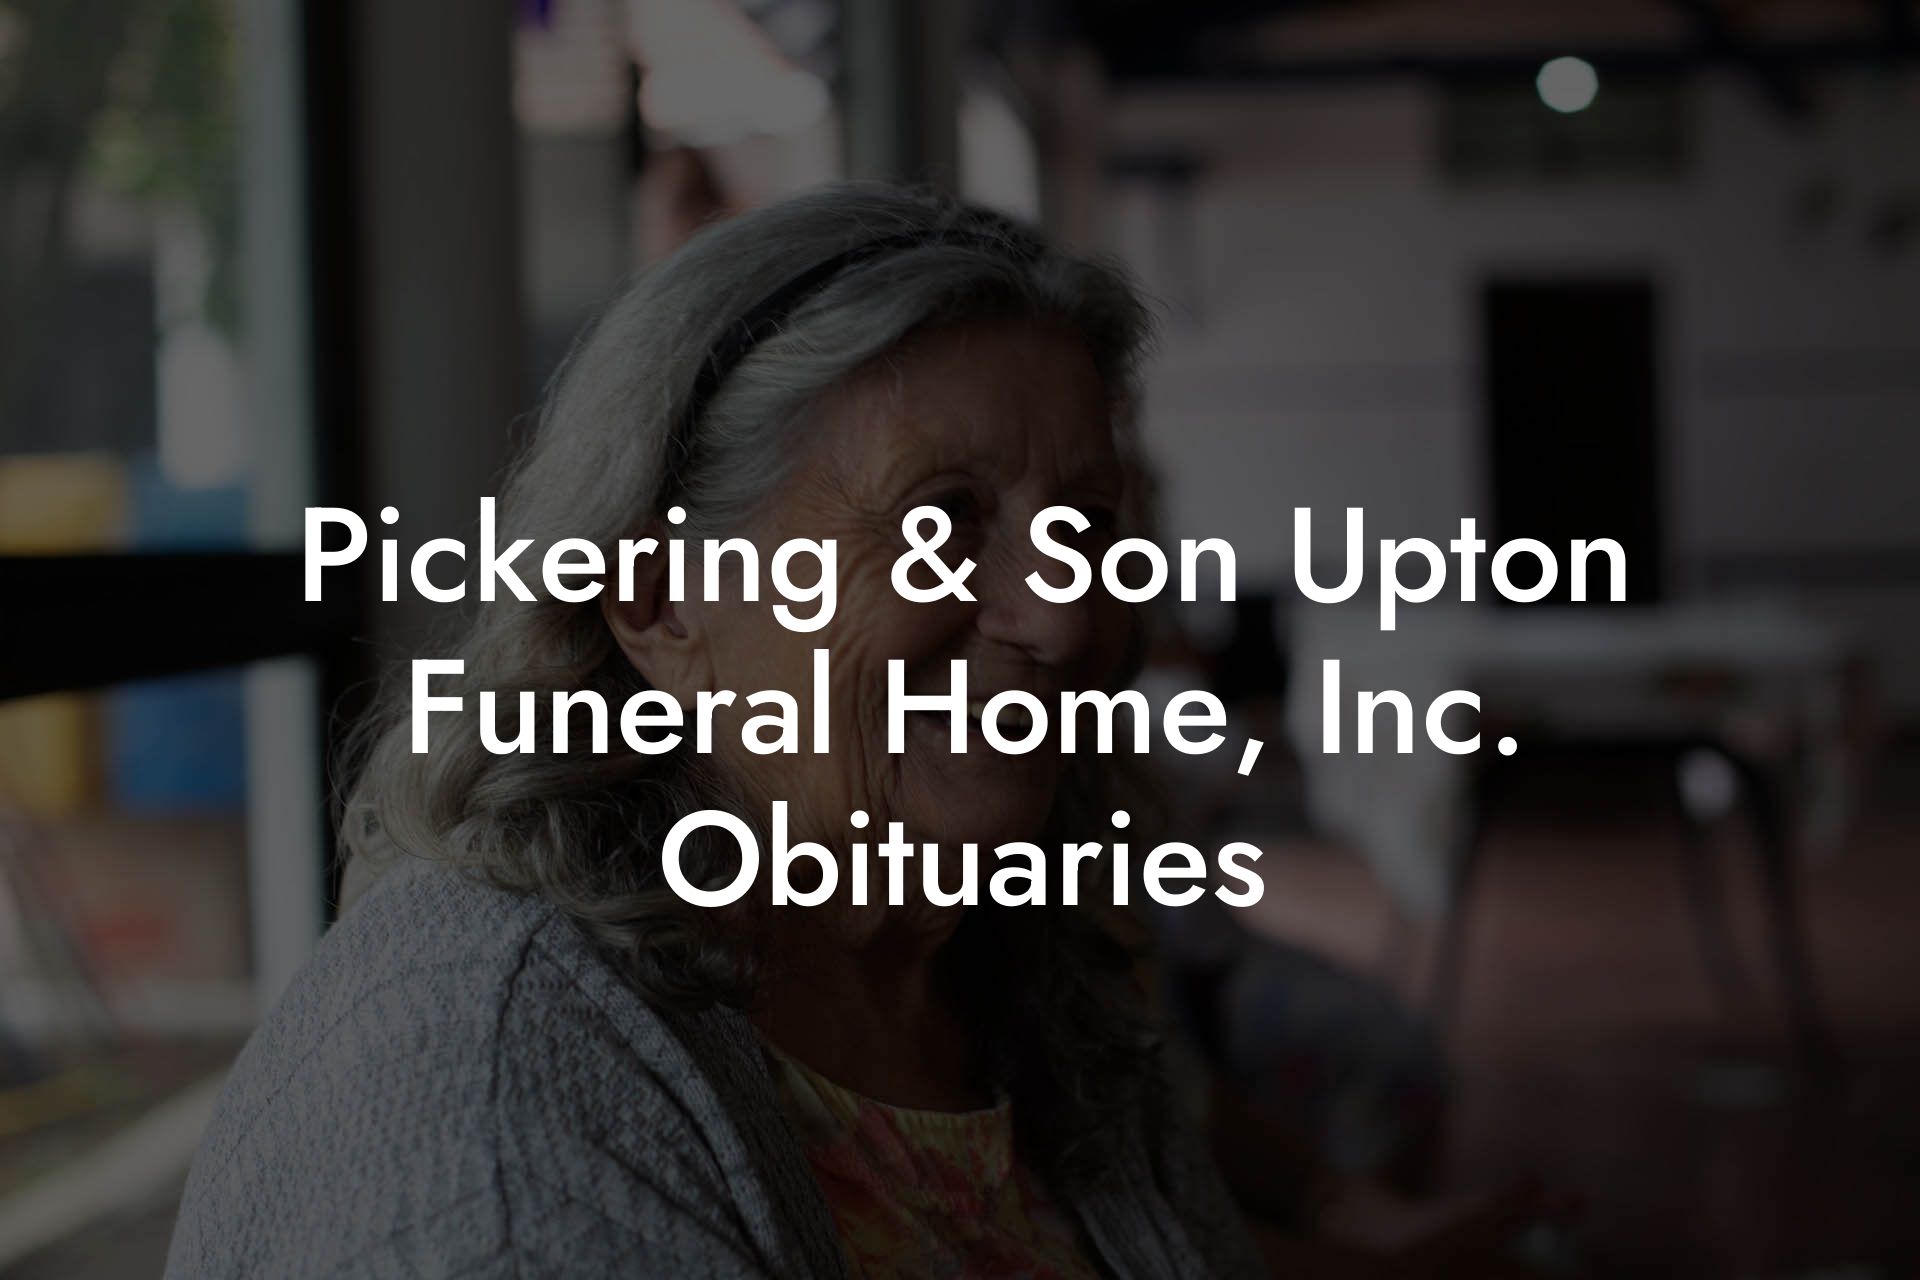 Pickering & Son Upton Funeral Home, Inc. Obituaries